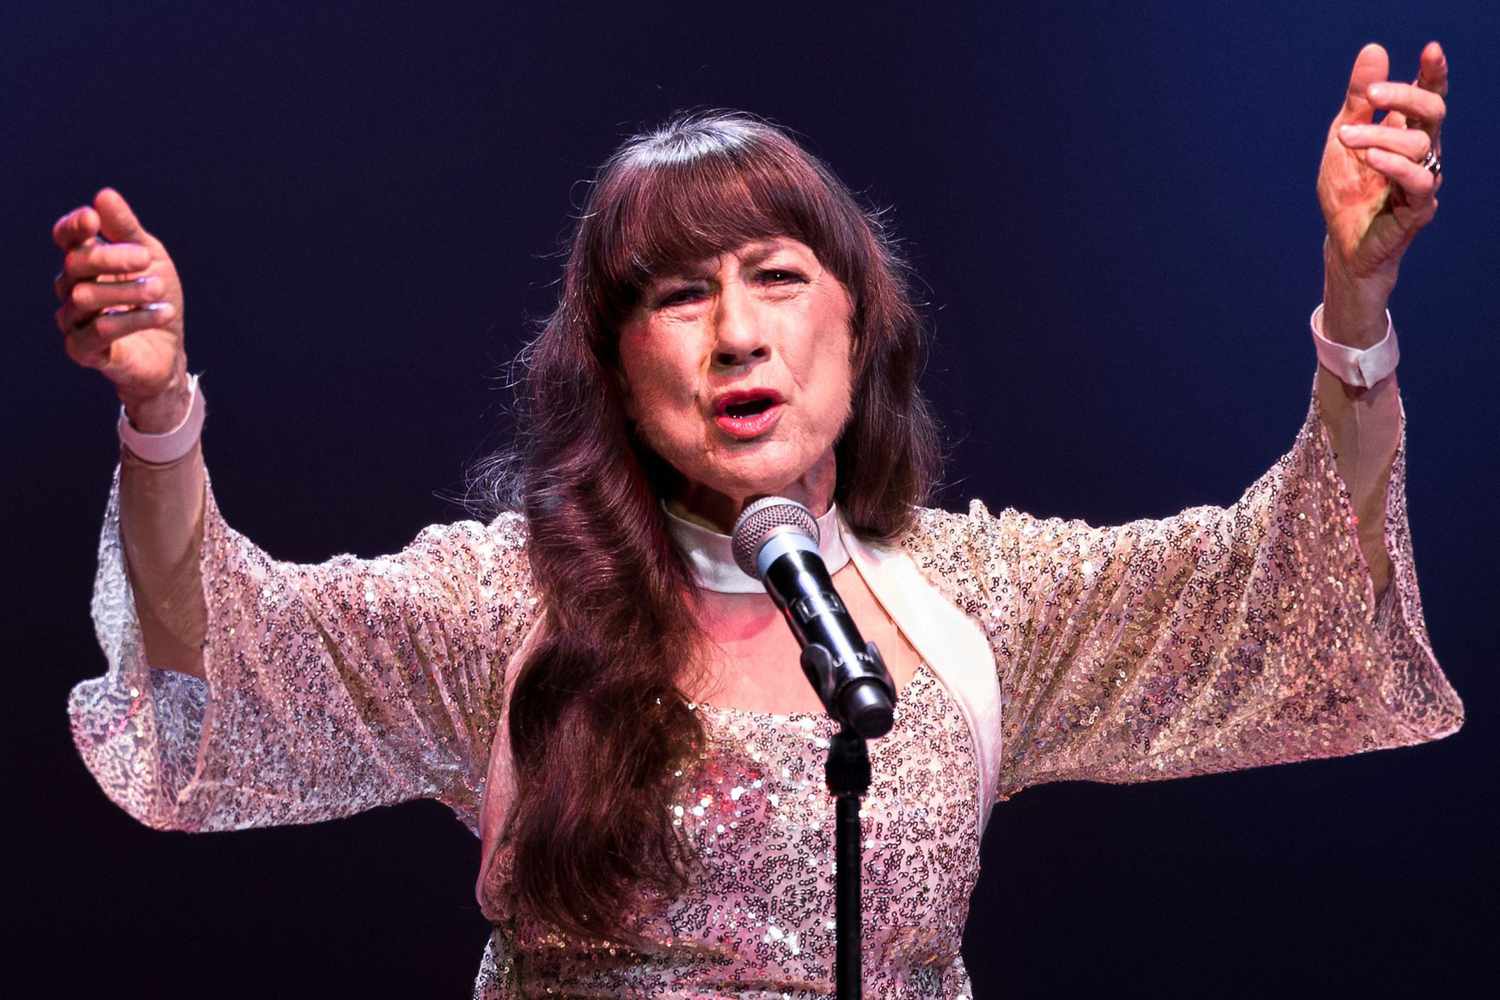 Mandatory Credit: Photo by Joel Goodman/Lnp/Shutterstock (3785643h) The Seekers - Judith Durham The Seekers in concert at Bridgewater Hall, Manchester, Britain - 29 May 2014